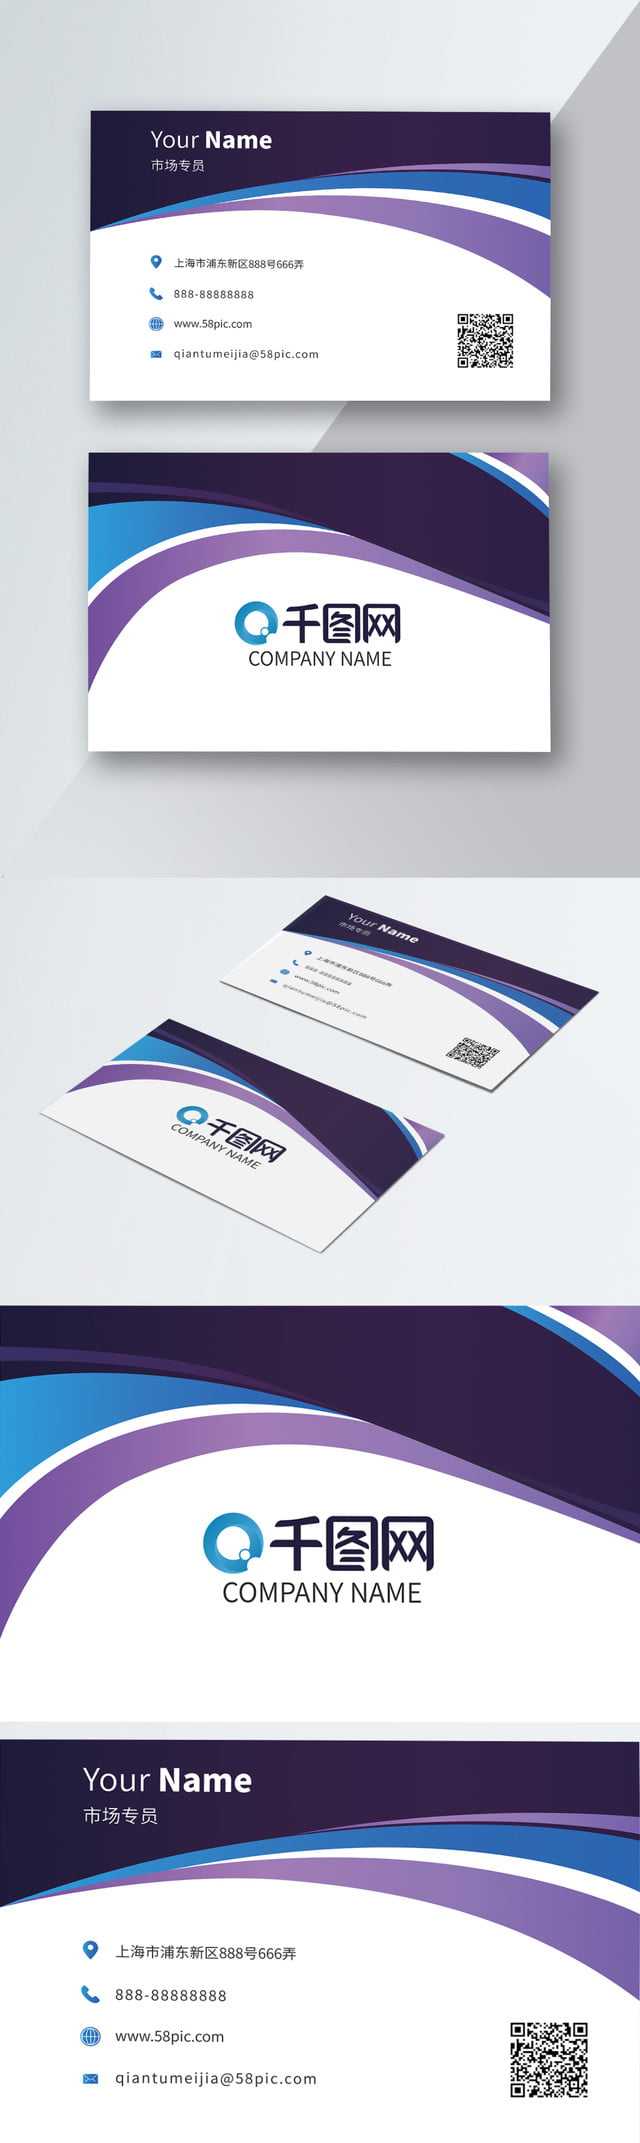 Business Card Pos Machine Installation Unionpay Logo In Plastering Business Cards Templates